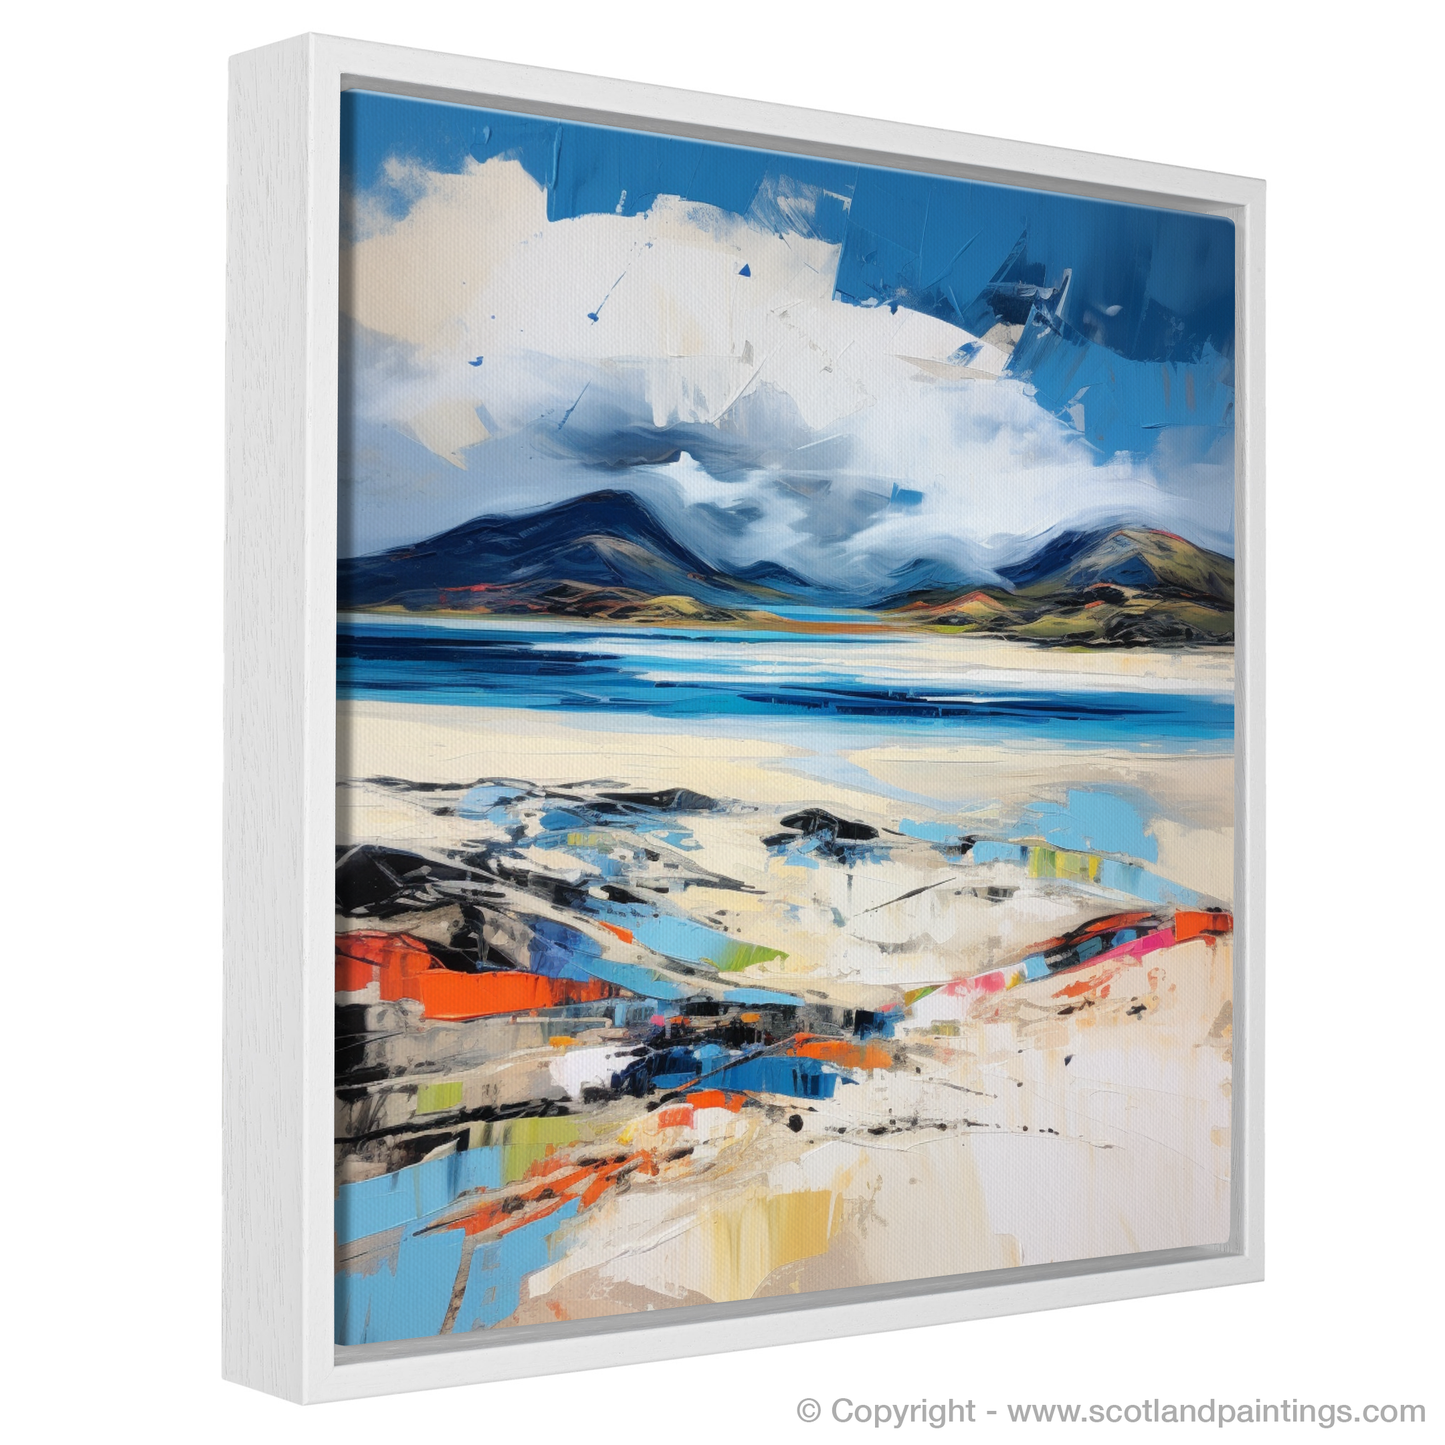 Painting and Art Print of Luskentyre Beach, Isle of Harris entitled "Luskentyre Beach's Wild Symphony - An Expressionist Journey".